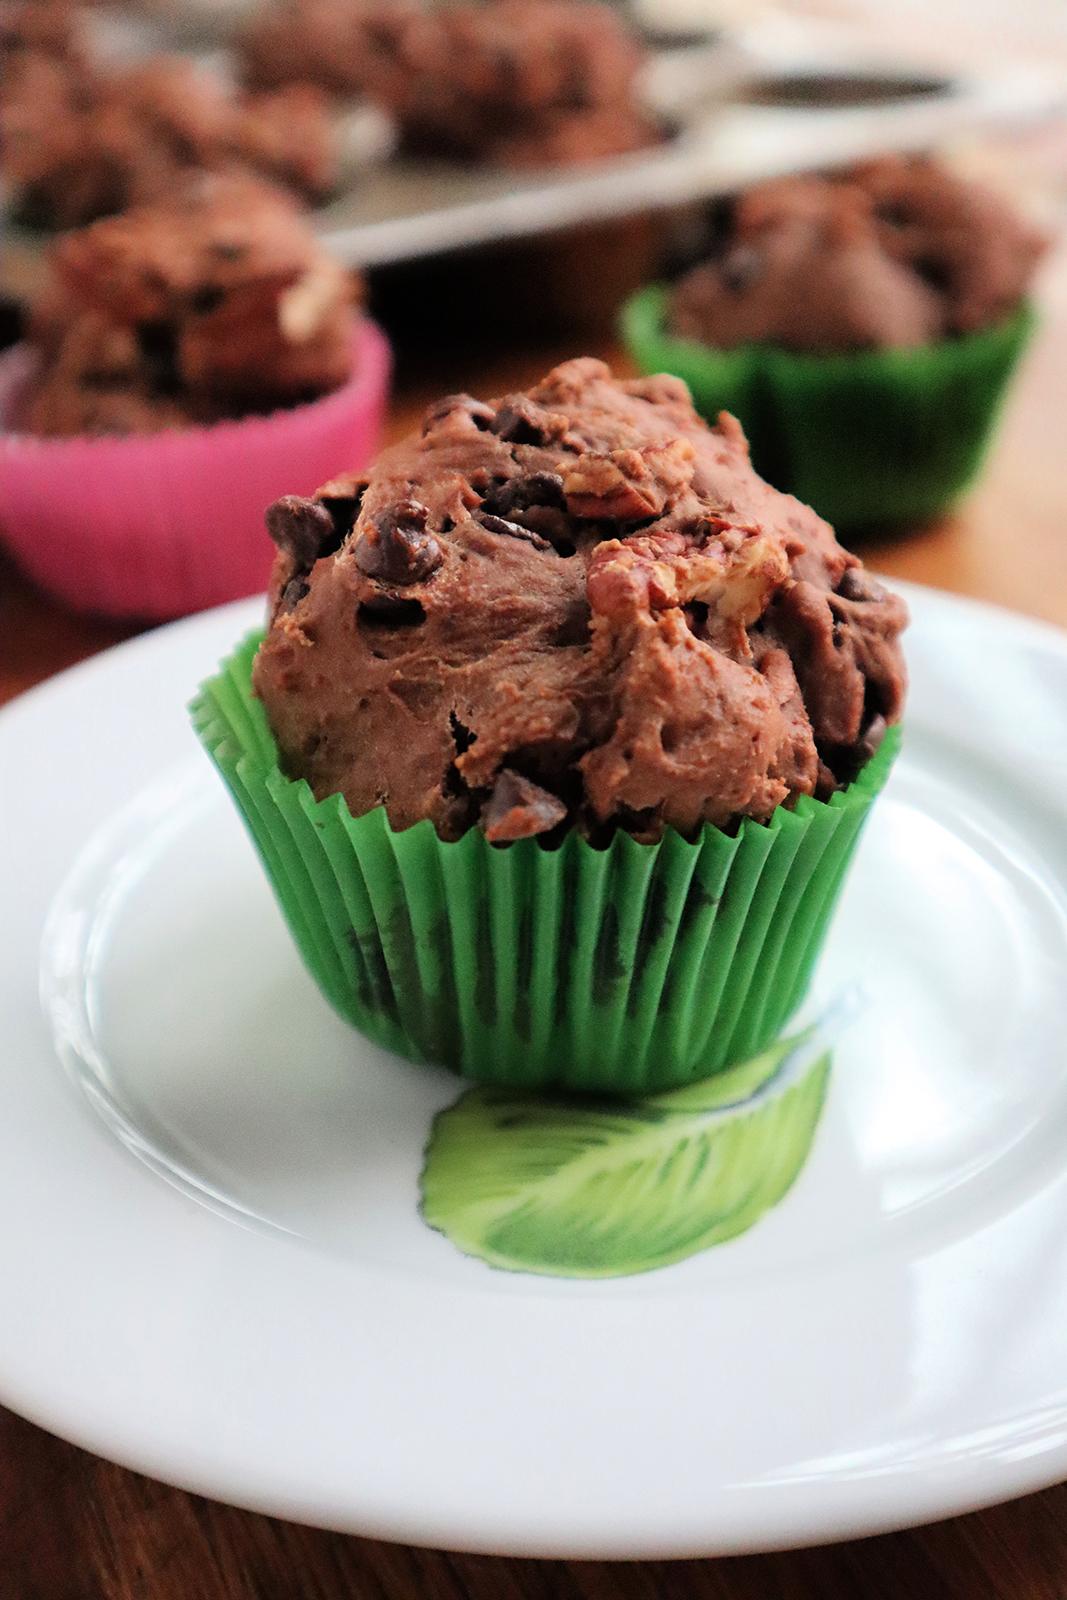 Packed with essential minerals such as iron and magnesium, these dark chocolate-banana "superhero" muffins look like dessert but are actually wholesome enough to count as breakfast. (Gretchen McKay/Pittsburgh Post-Gazette/TNS)